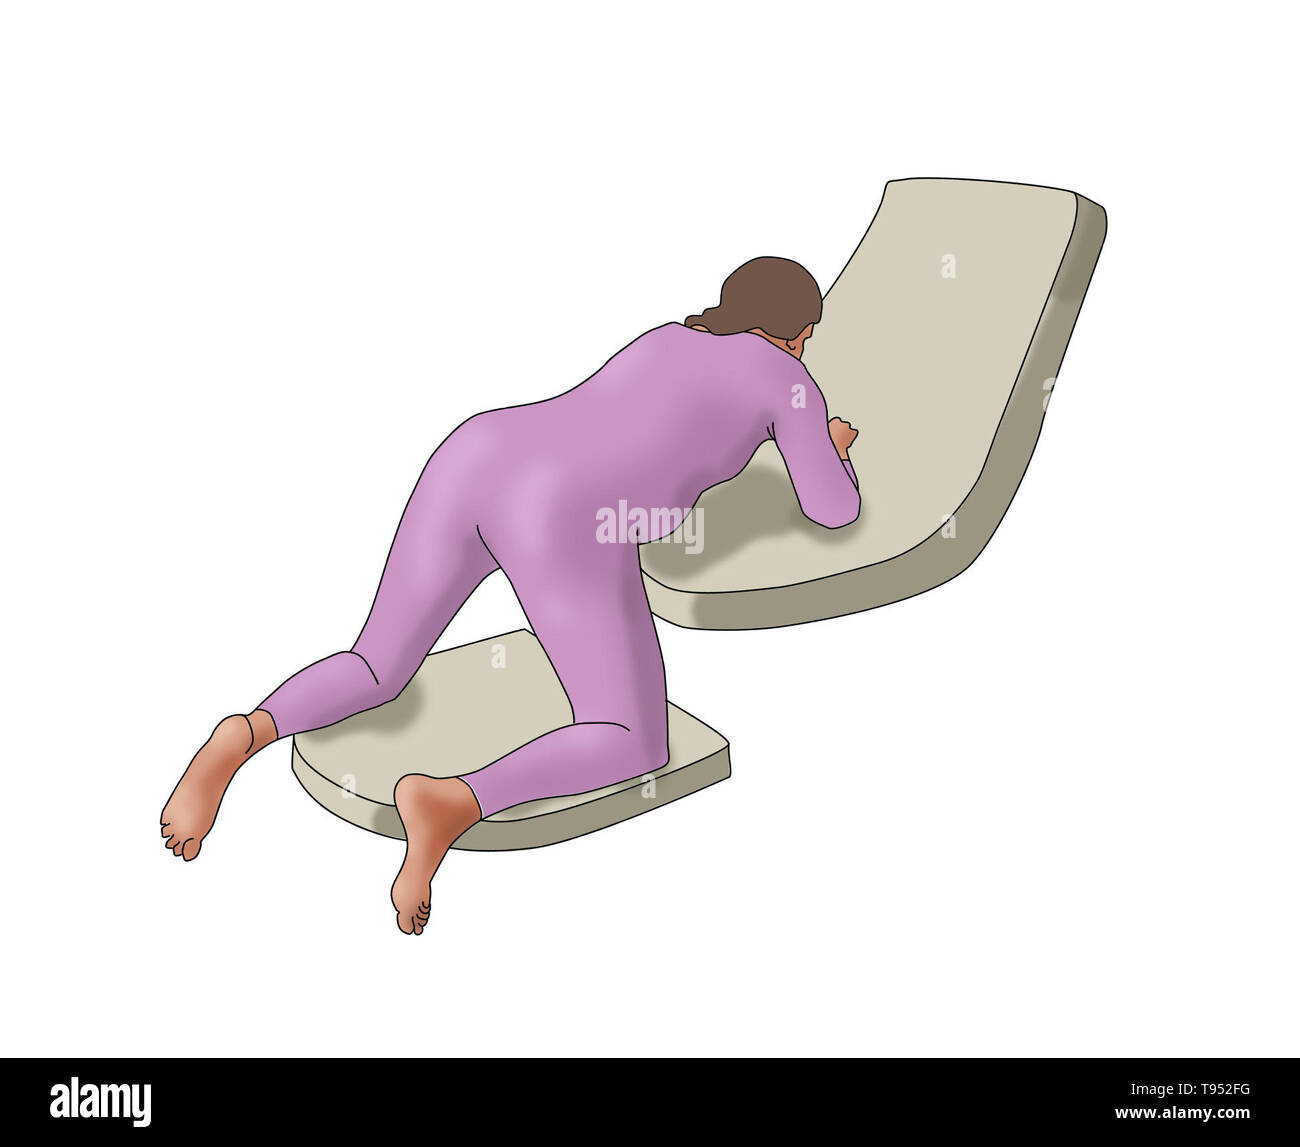 Illustration showing a woman in the All Fours birthing position. Stock Photo